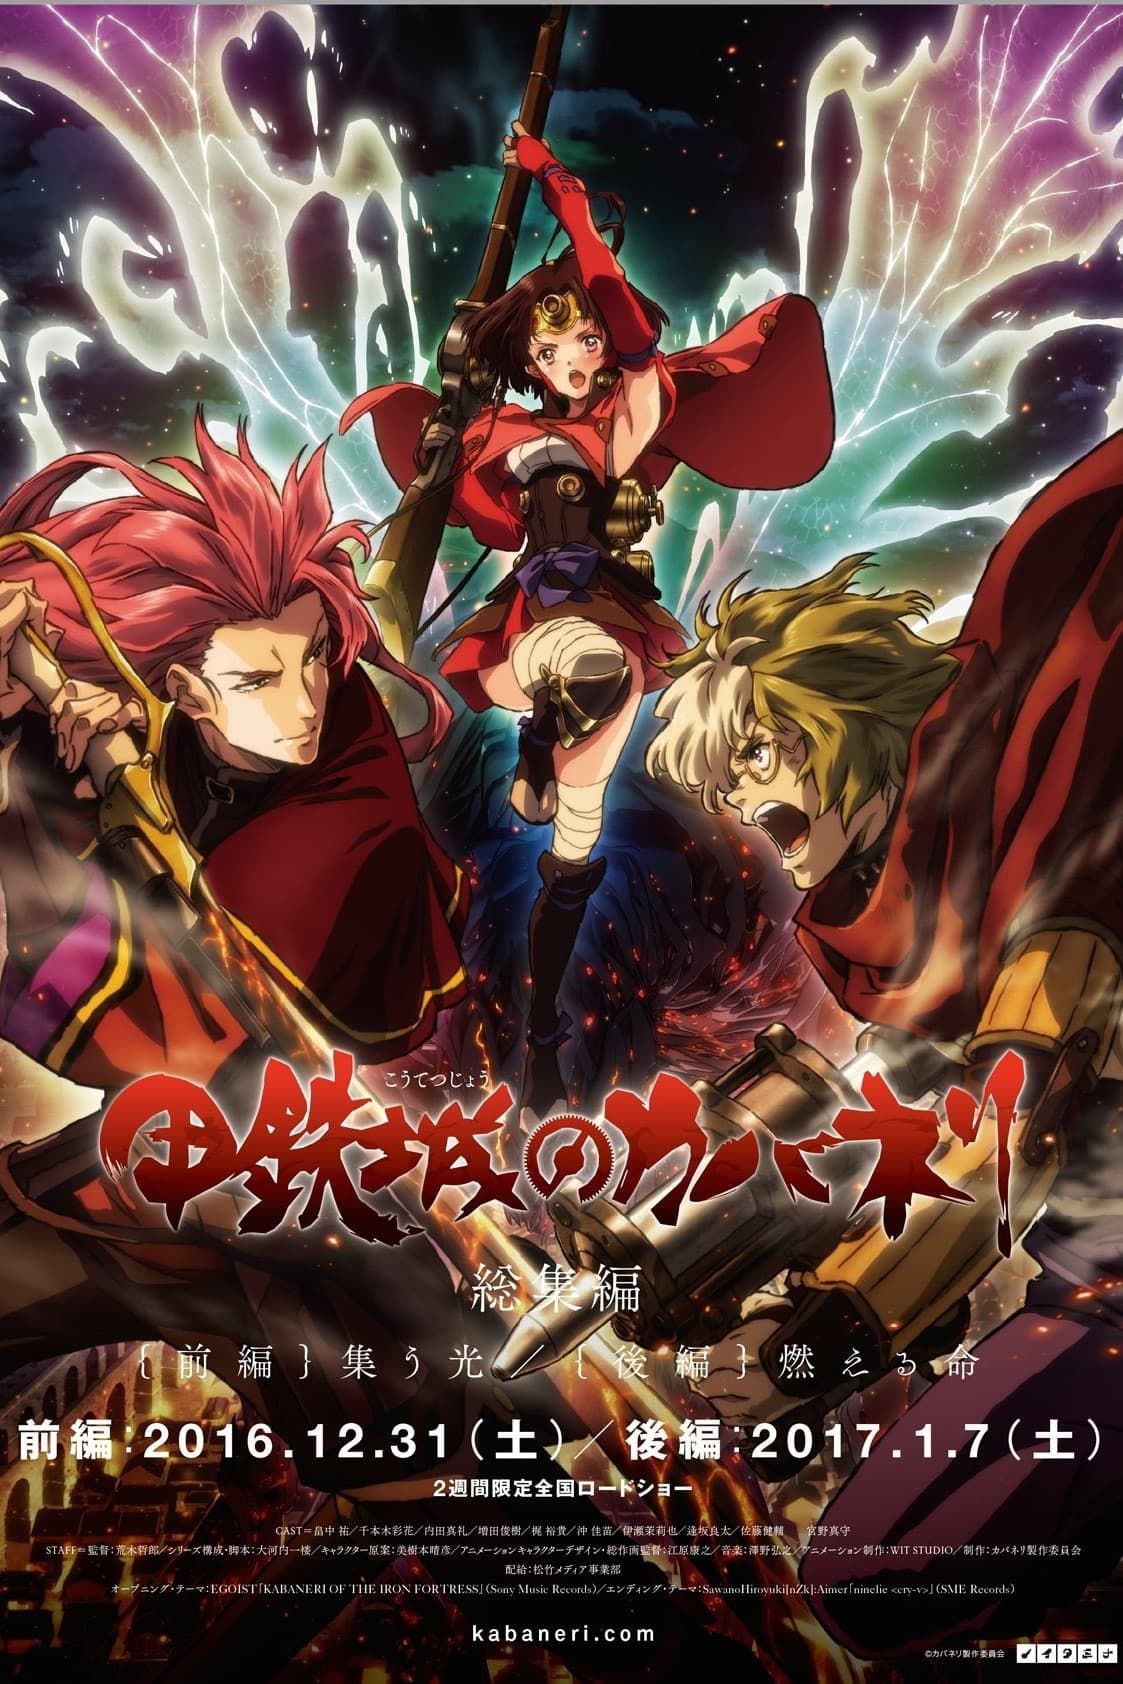 Kabaneri of the Iron Fortress Movie 3: The Battle of Unato Slated to  Premier in Spring 2019!